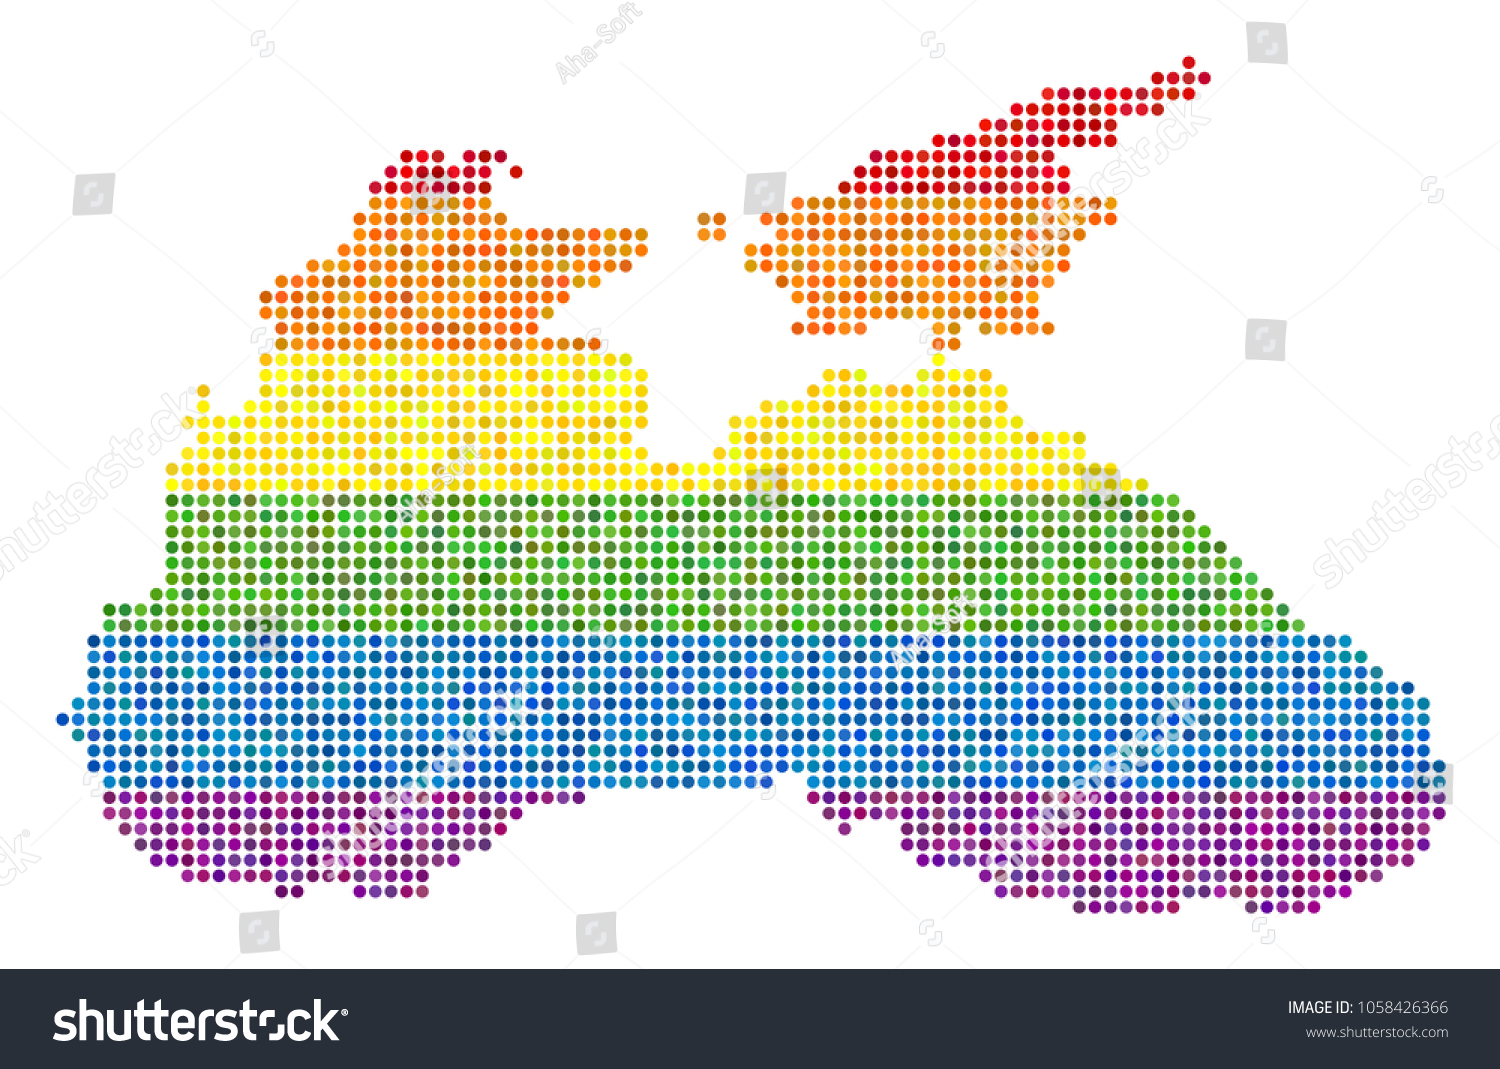 A Dotted Lgbt Pride Black Sea Map For Lesbians Royalty Free Stock Vector 1058426366 9019